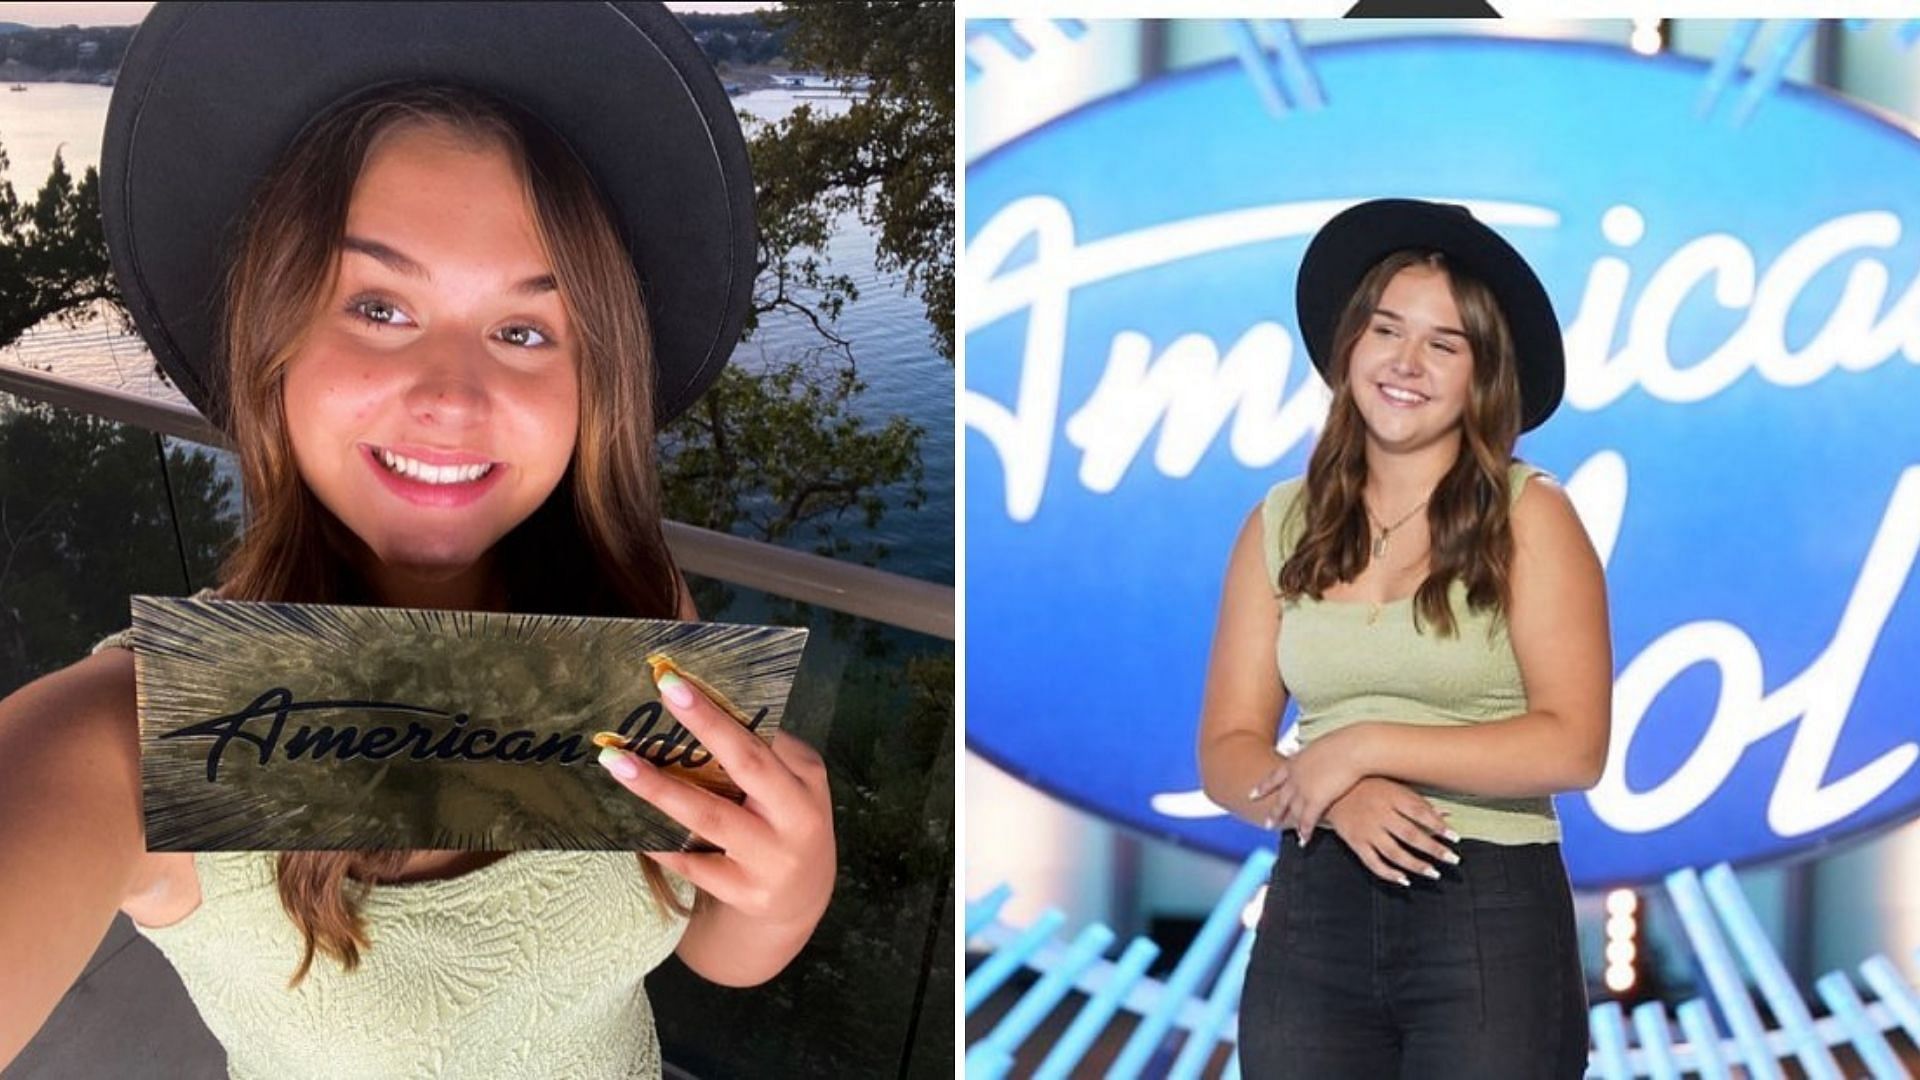 American Idol contestant Morgan Gruber gets a golden ticket to Hollywood (Image via Instagram/itsmorgangruber)